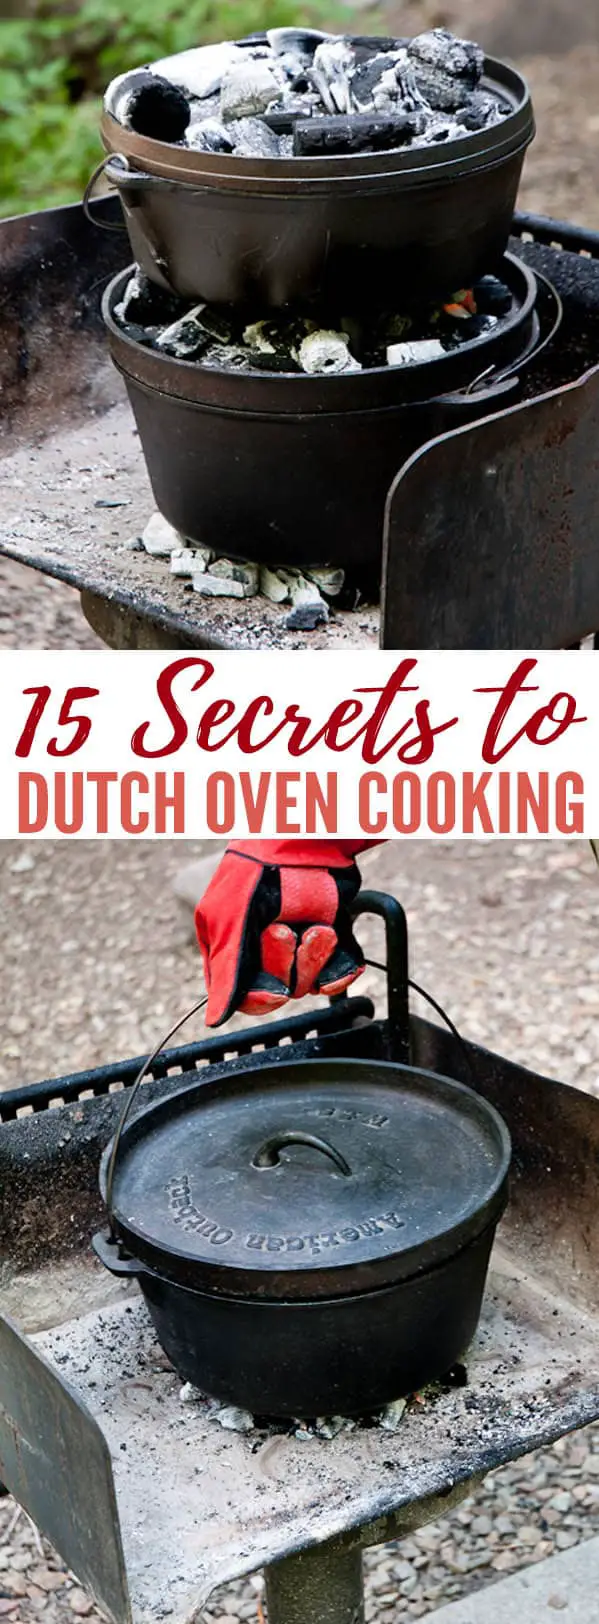 15 Secrets to Dutch Oven Cooking — Cooking with a dutch oven is not only just pure awesomeness, but it's also a great way to have better-tasting food. I have to agree that if you have never used or only cooked in one of these for a short amount of time it's pretty intimidating.